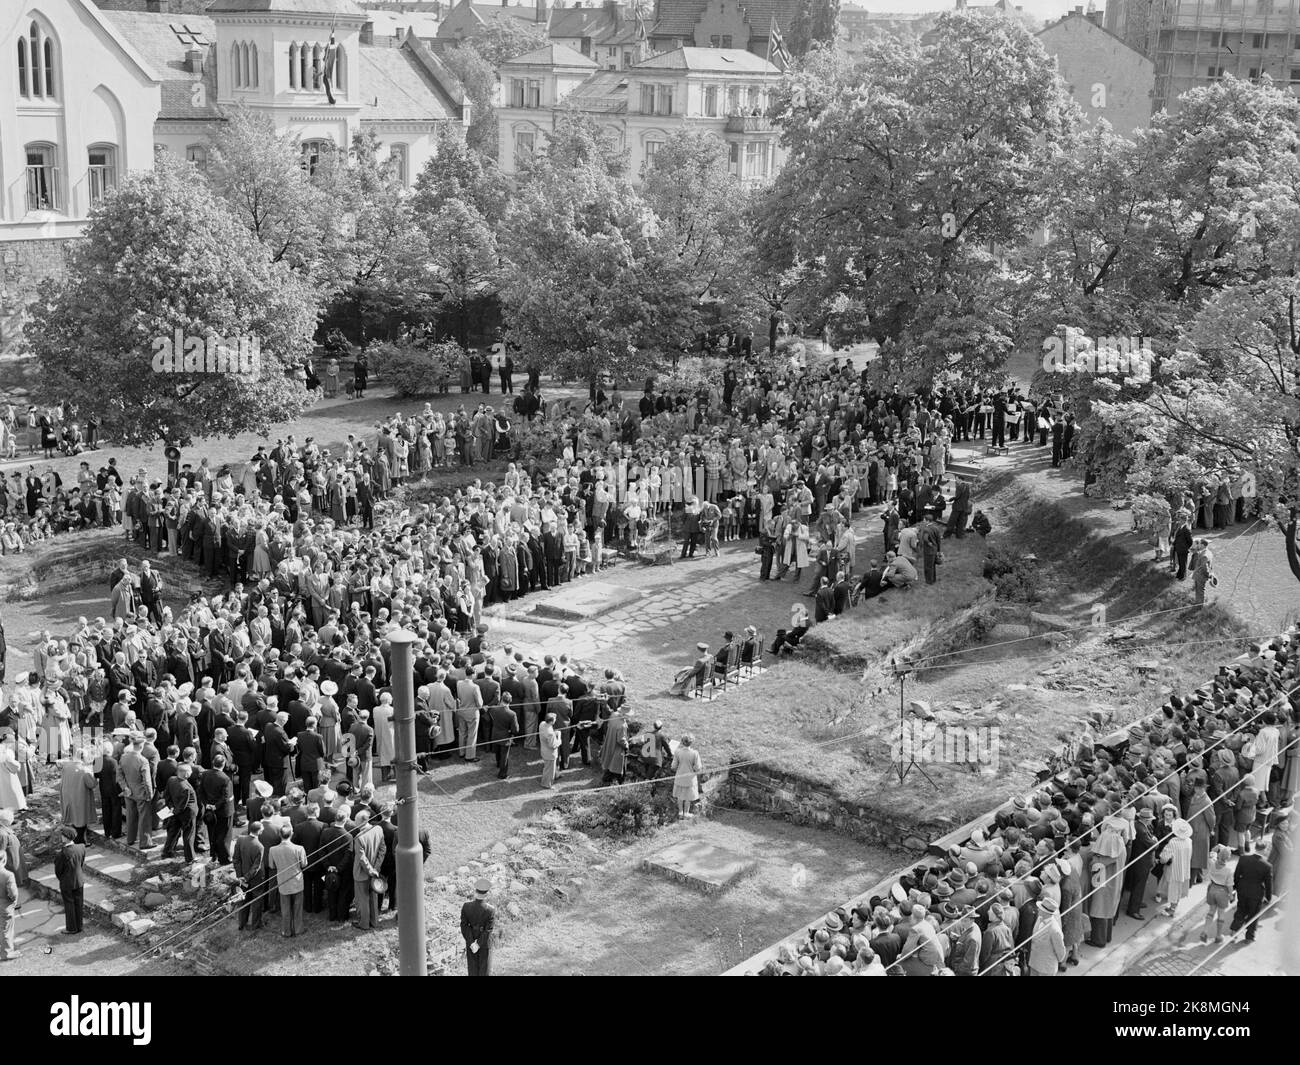 Oslo 19500514. Oslo city 900 year anniversary. The party jewelry in anniversary rushes. The celebration of Oslo's 900th anniversary was opened in the historic Memorial Park in the Old Town just off the current Bispegård. Many people were present, but only some of the audience could access the park, but on the street outside, people stood in long ranks, the speakers made sure everyone was told. Photo: Sverre A Børretzen / Arne Kjus / Current / NTB Stock Photo